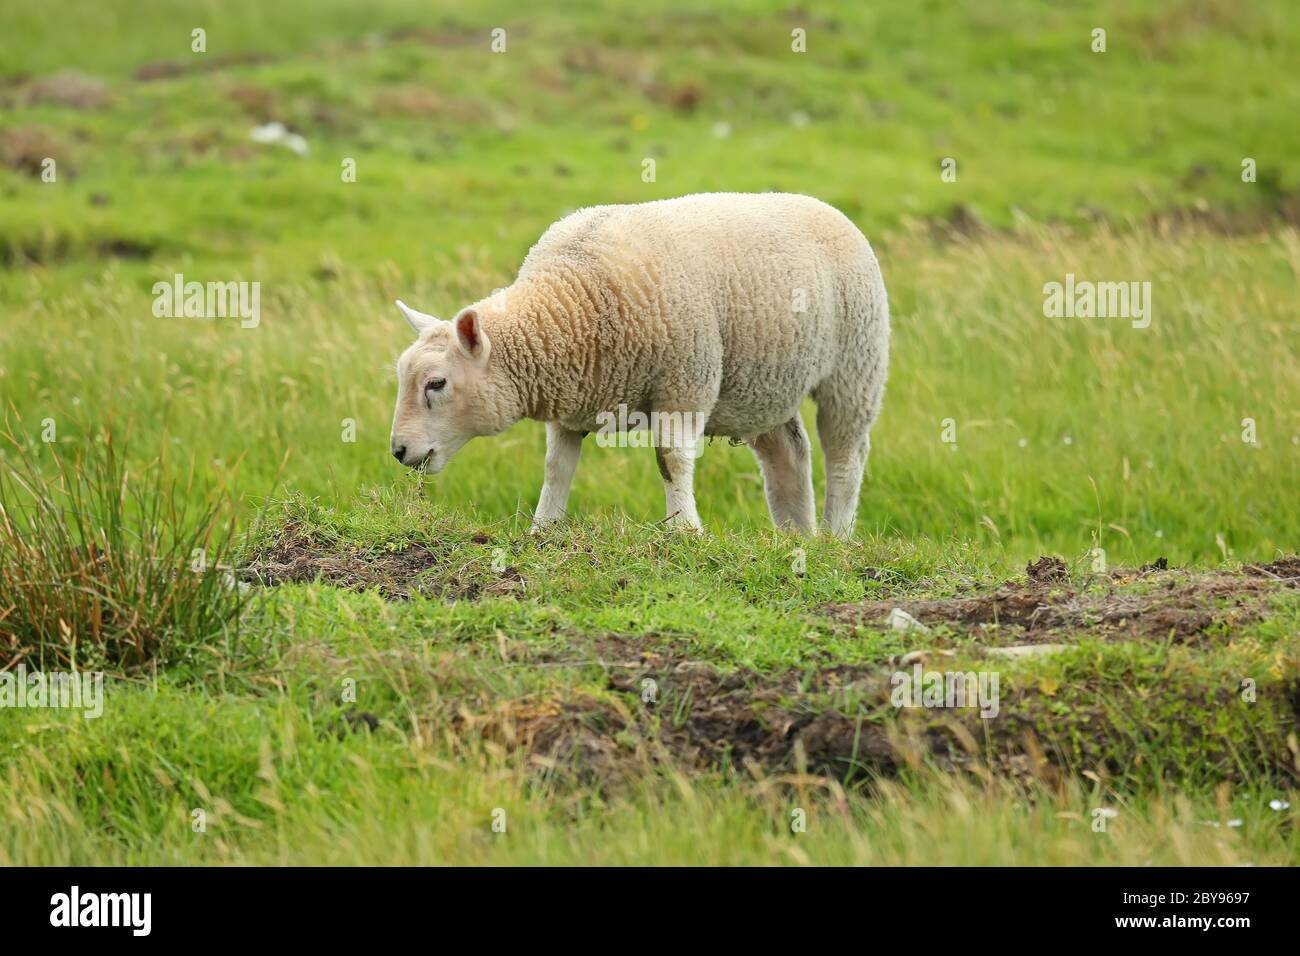 One sheep grazing and standing in a green grass field, Shetland Islands, Scotland. Stock Photo